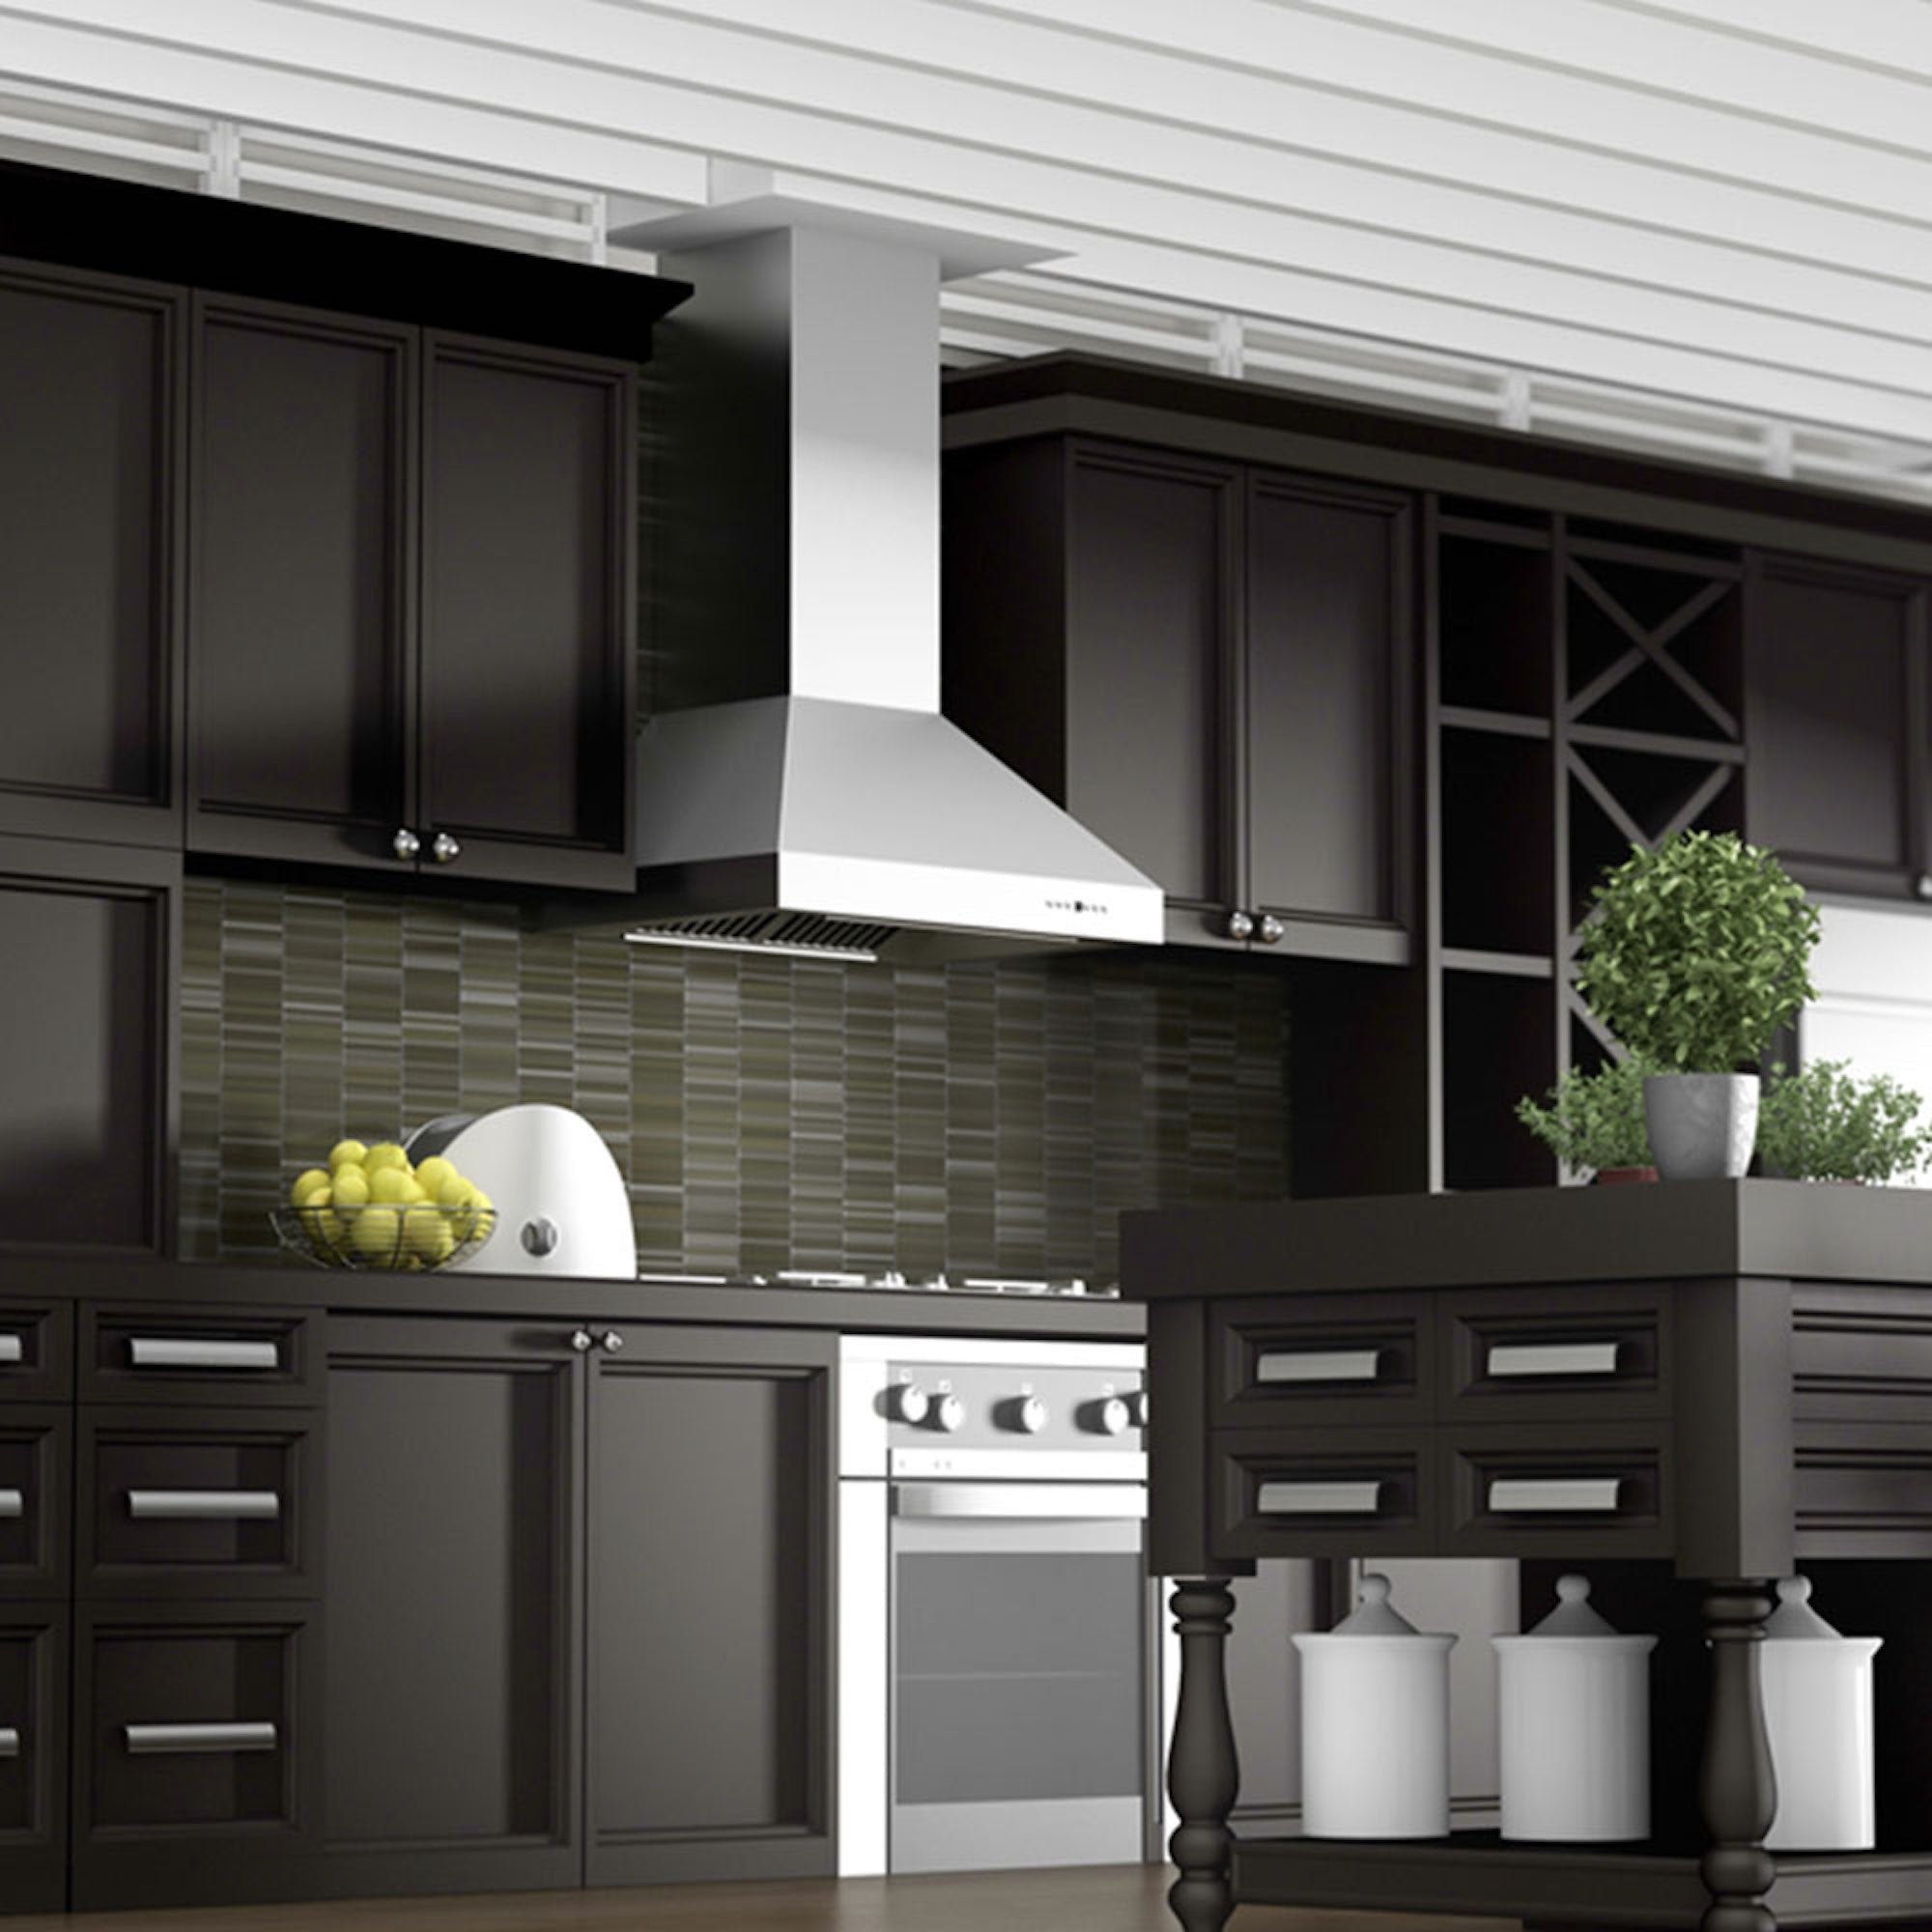 ZLINE Ducted Wall Mount Range Hood in Outdoor Approved Stainless Steel (697-304) rendering in a rustic kitchen wide.